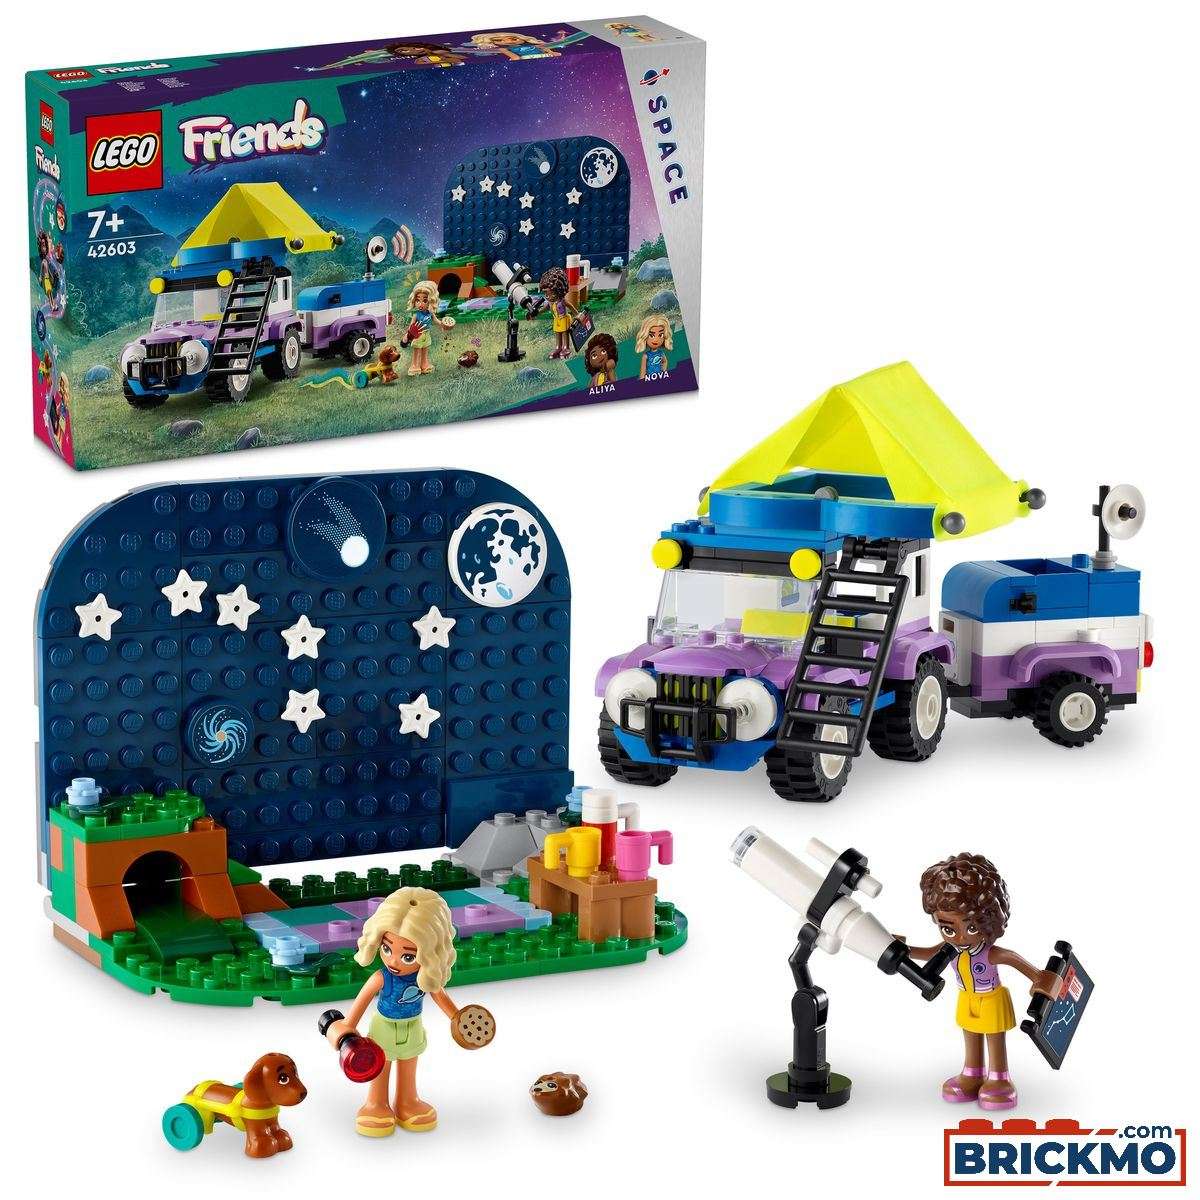 LEGO Friends 42603 Camping-van sotto le stelle 42603